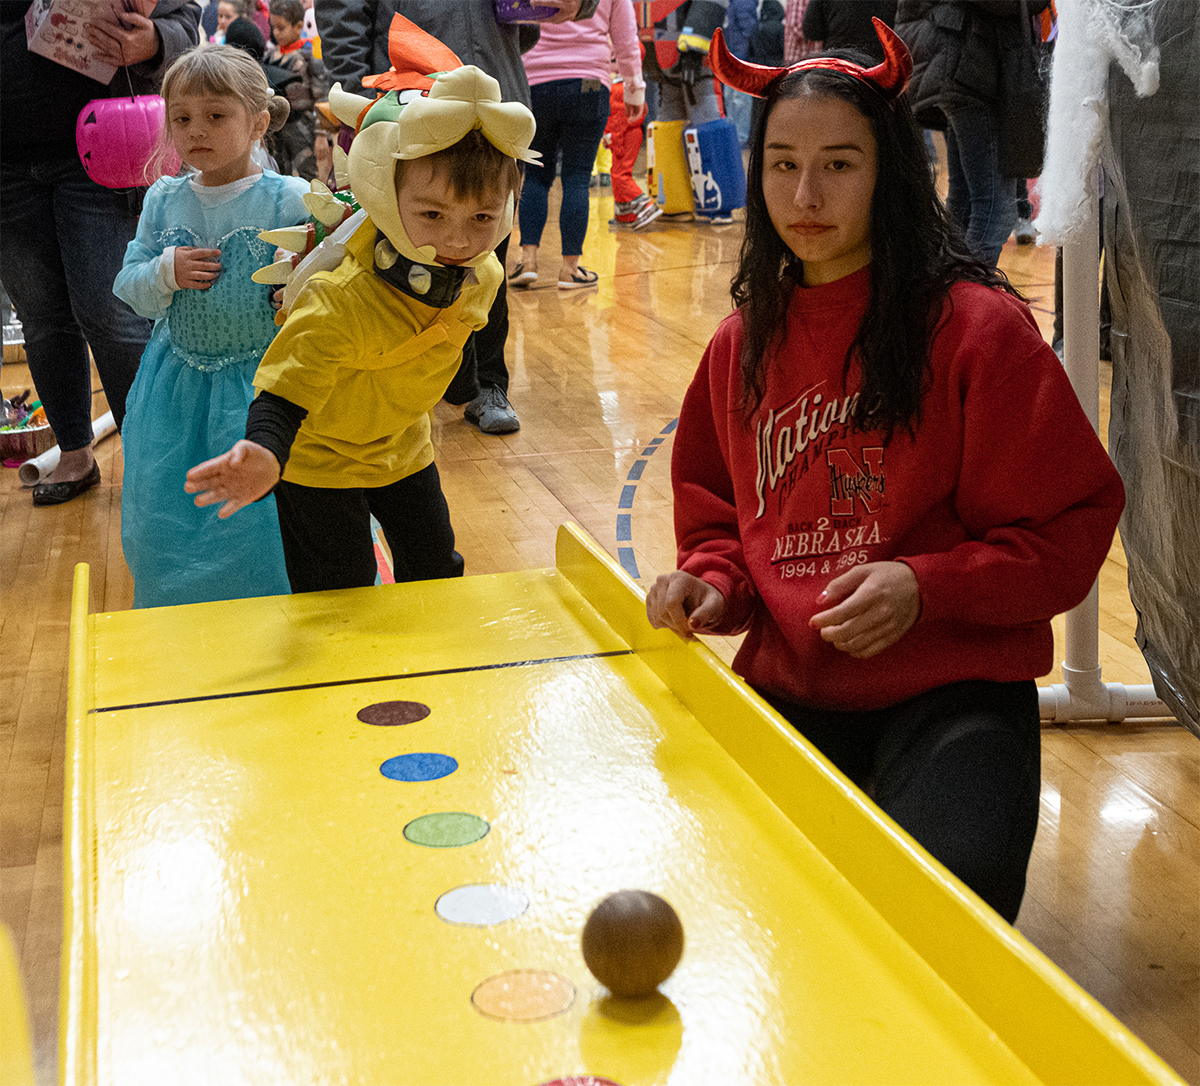 Kids in costumes playing skeeter's ball